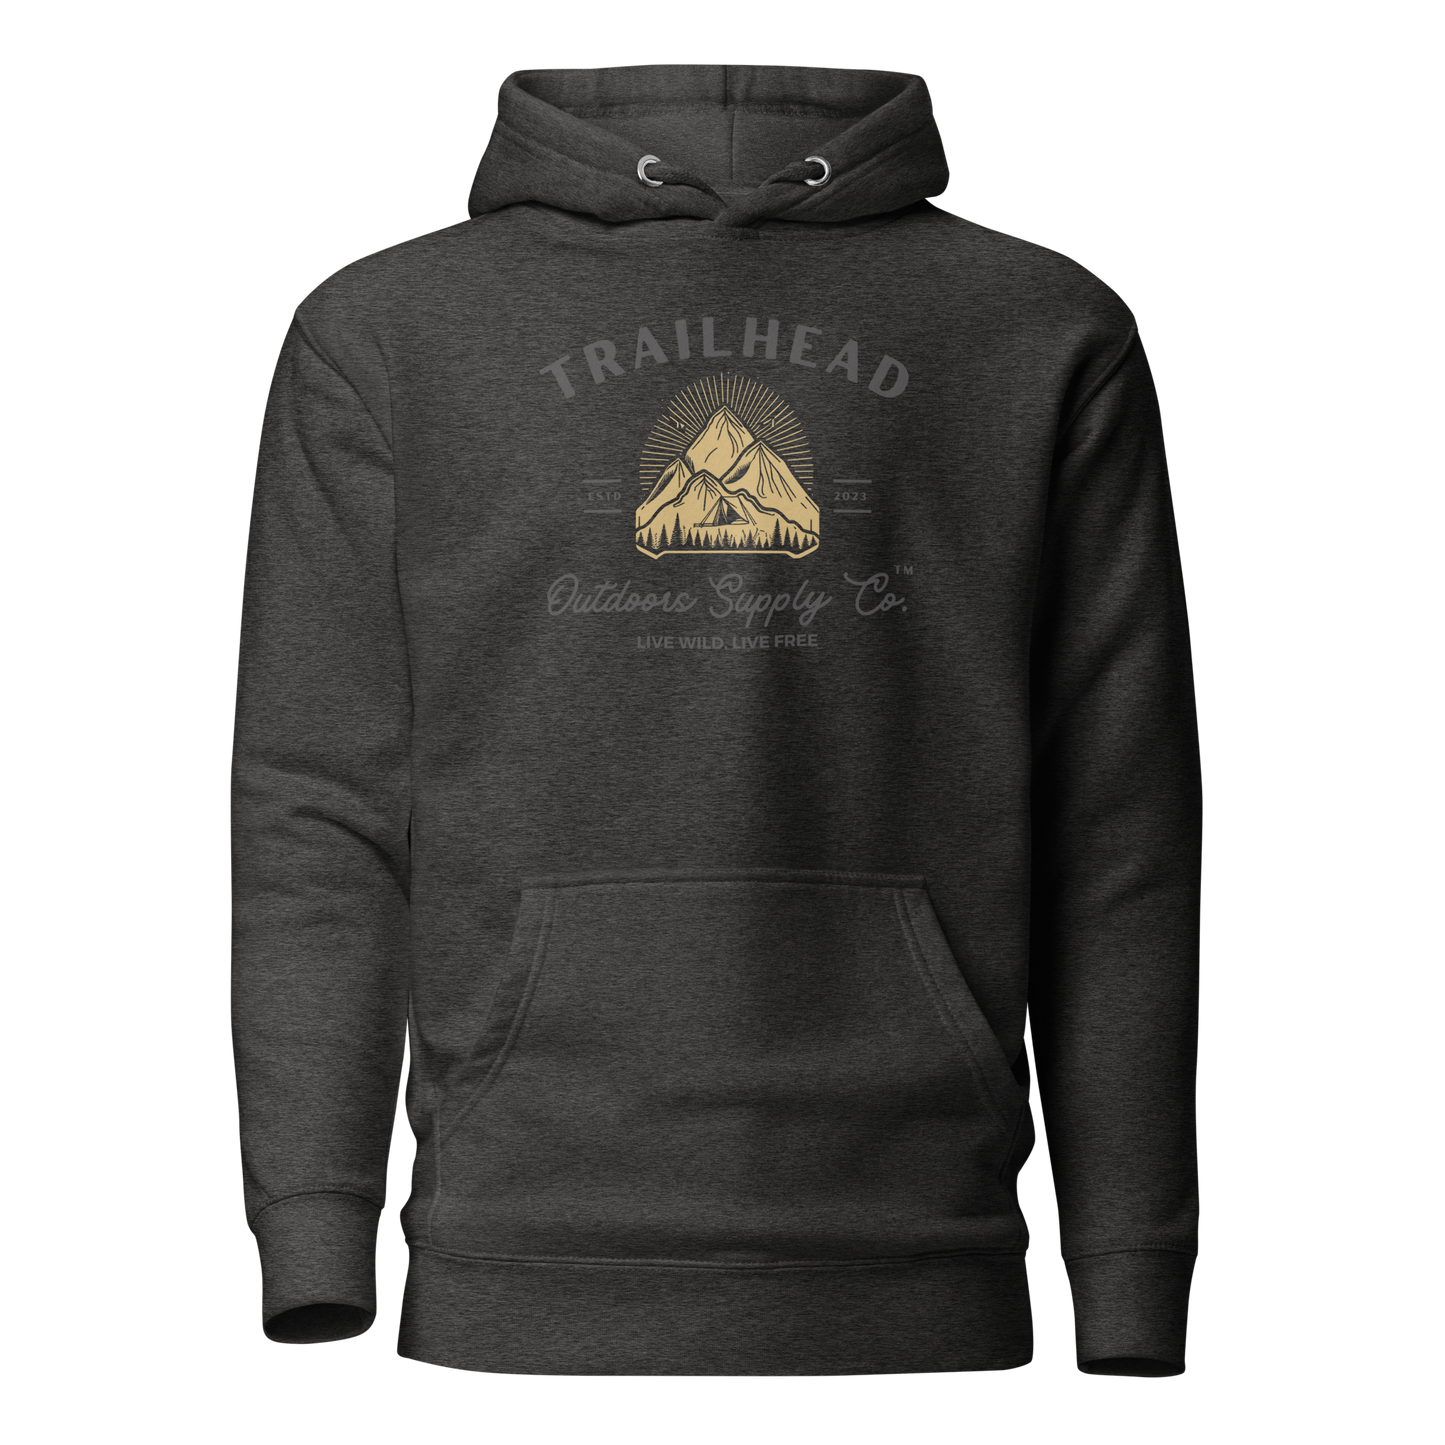 Trailhead Outdoors Supply Co.™ Hoodie Cotton Heritage M2580